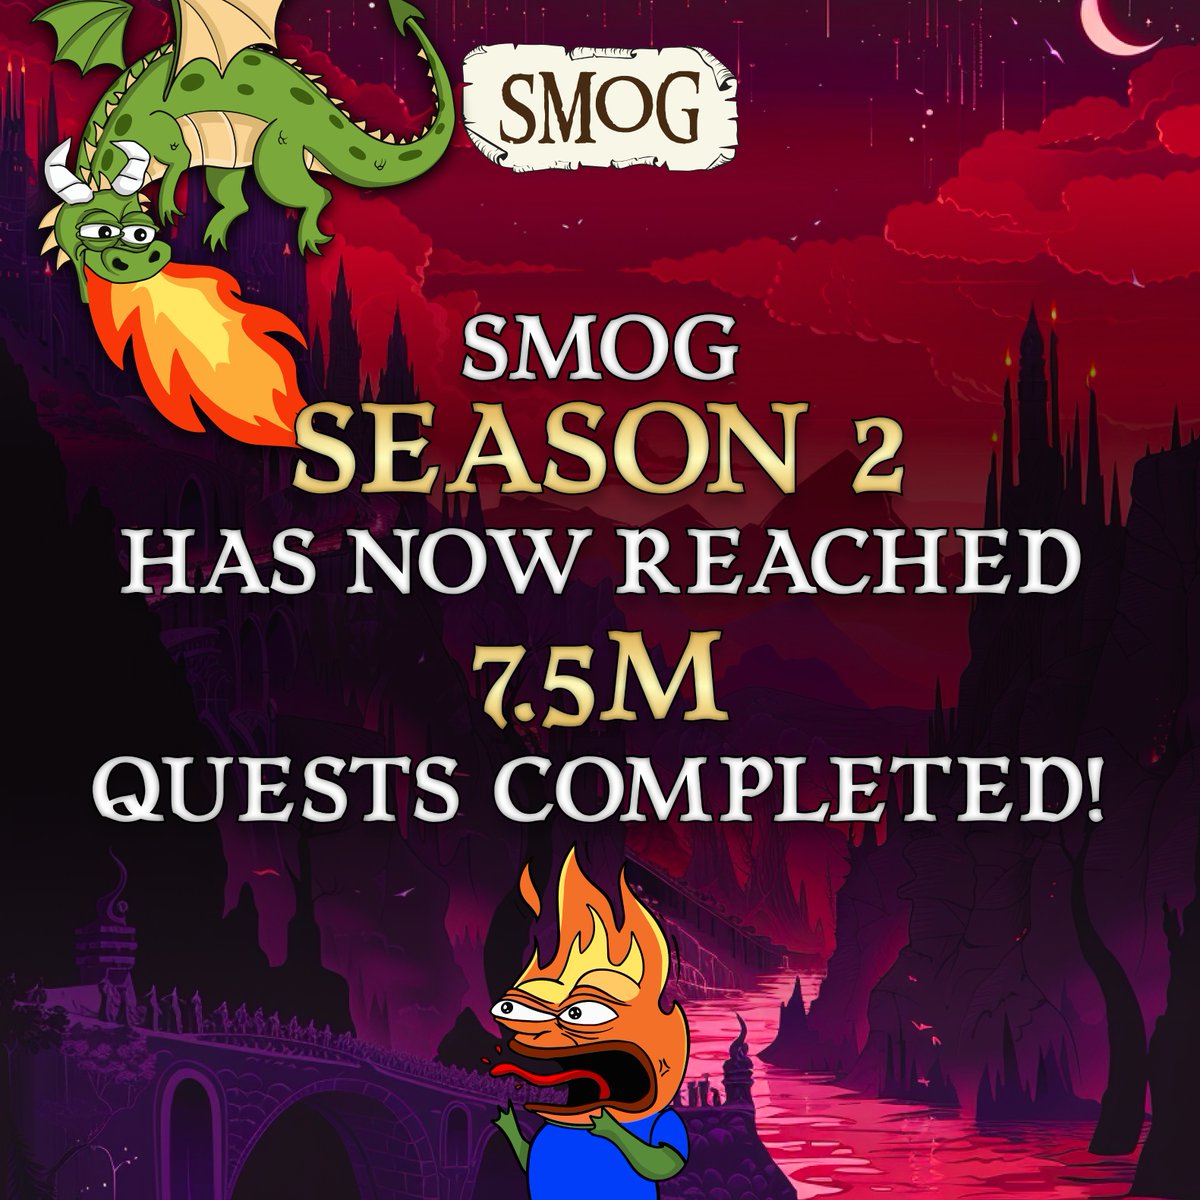 Celebrating another fantastic achievement from our community! 🎊 We've surpassed 7.5 million quests completed in #SMOG Season 2! 🔥 Trade $SMOG, ascend the S2 leaderboard and increase your XP now! 💥 bit.ly/BuySmog #SmogSwap #TradeSmog #Solana #Memecoins